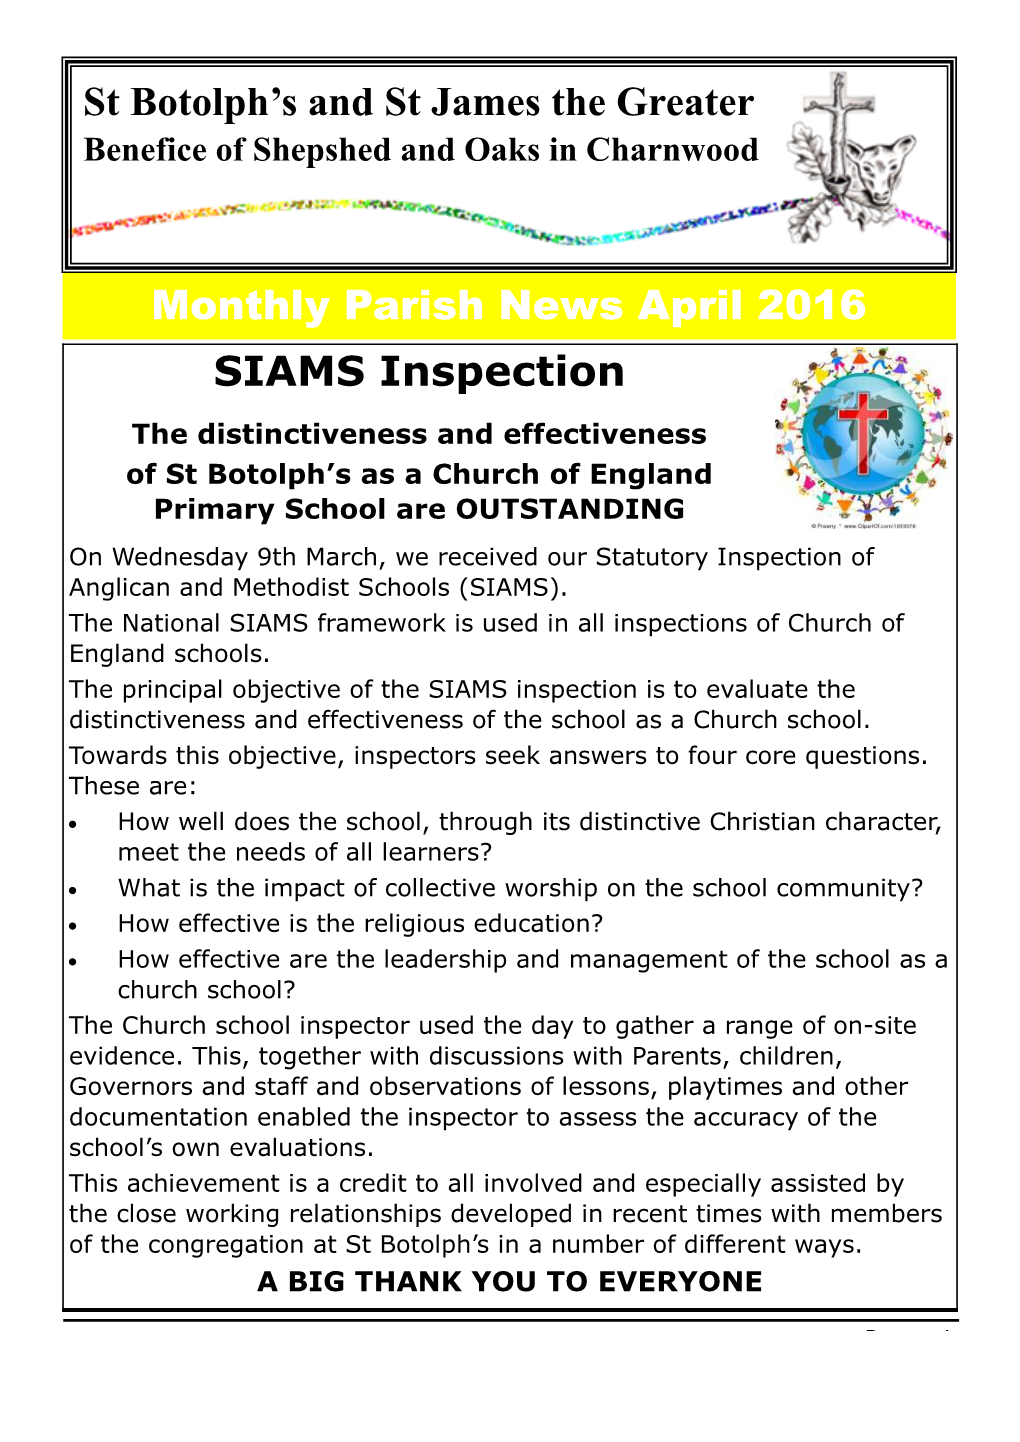 St Botolph's and St James the Greater Monthly Parish News April 2016